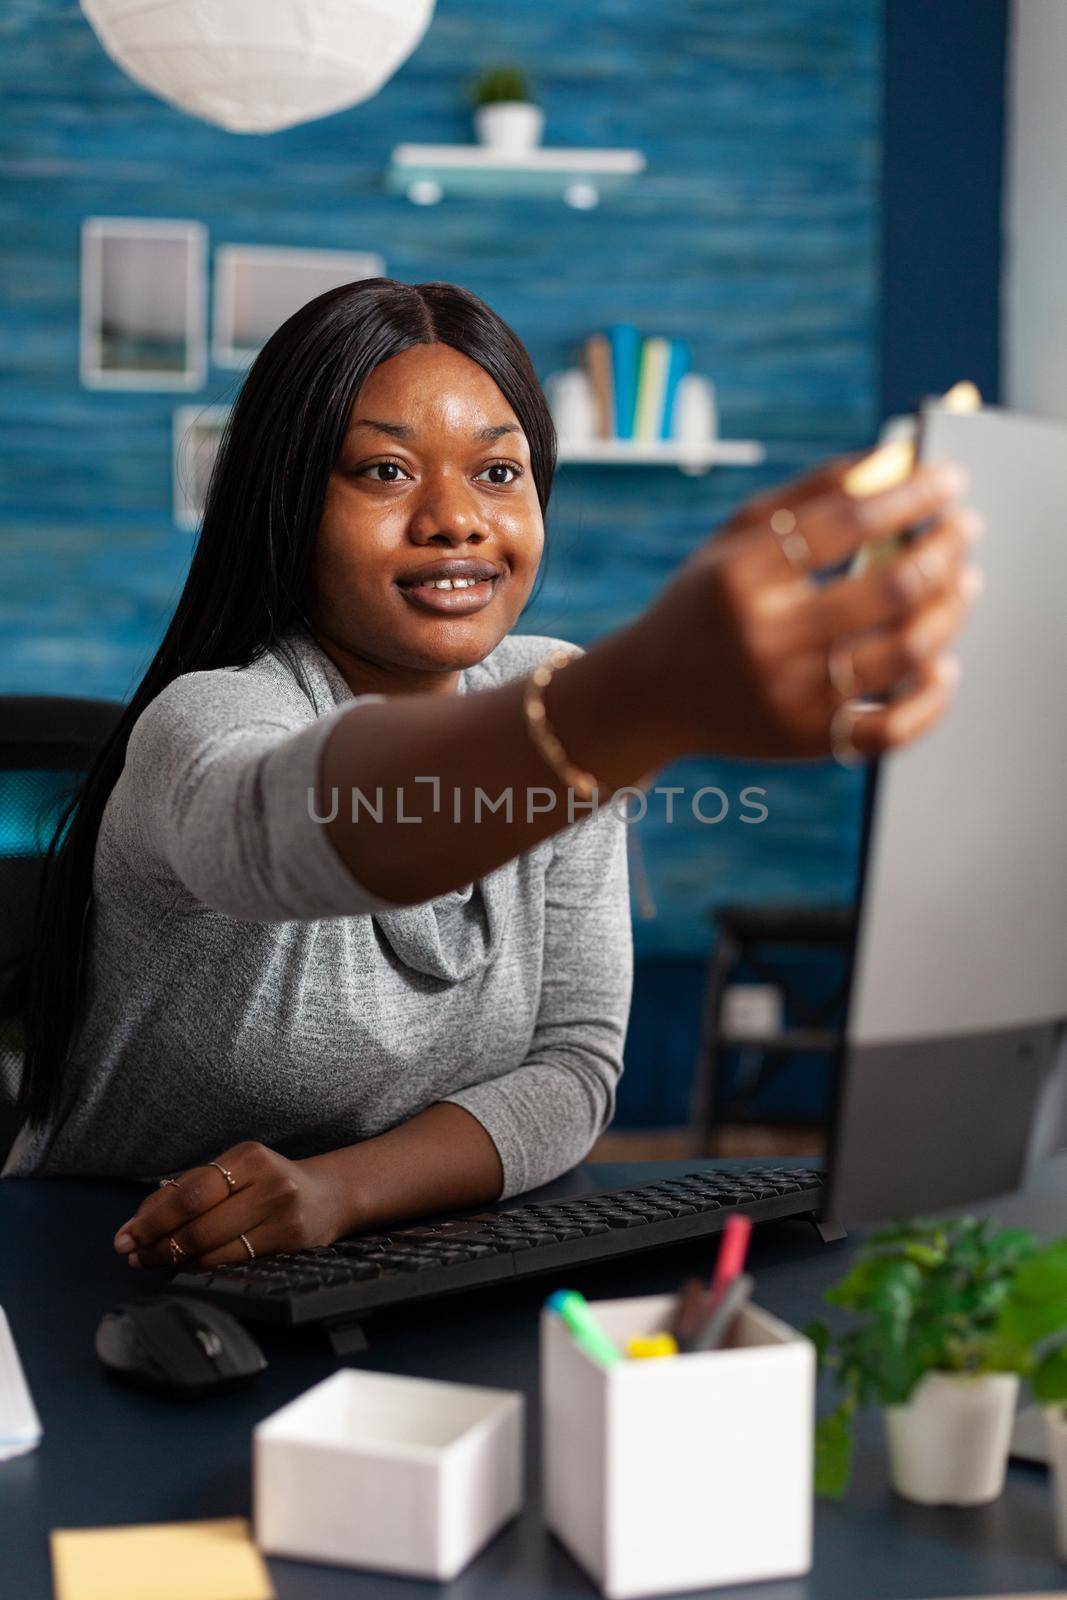 African american student studying business course using university elearning platform working remote from home. Black woman putting stickey notes on computer during academic webinar